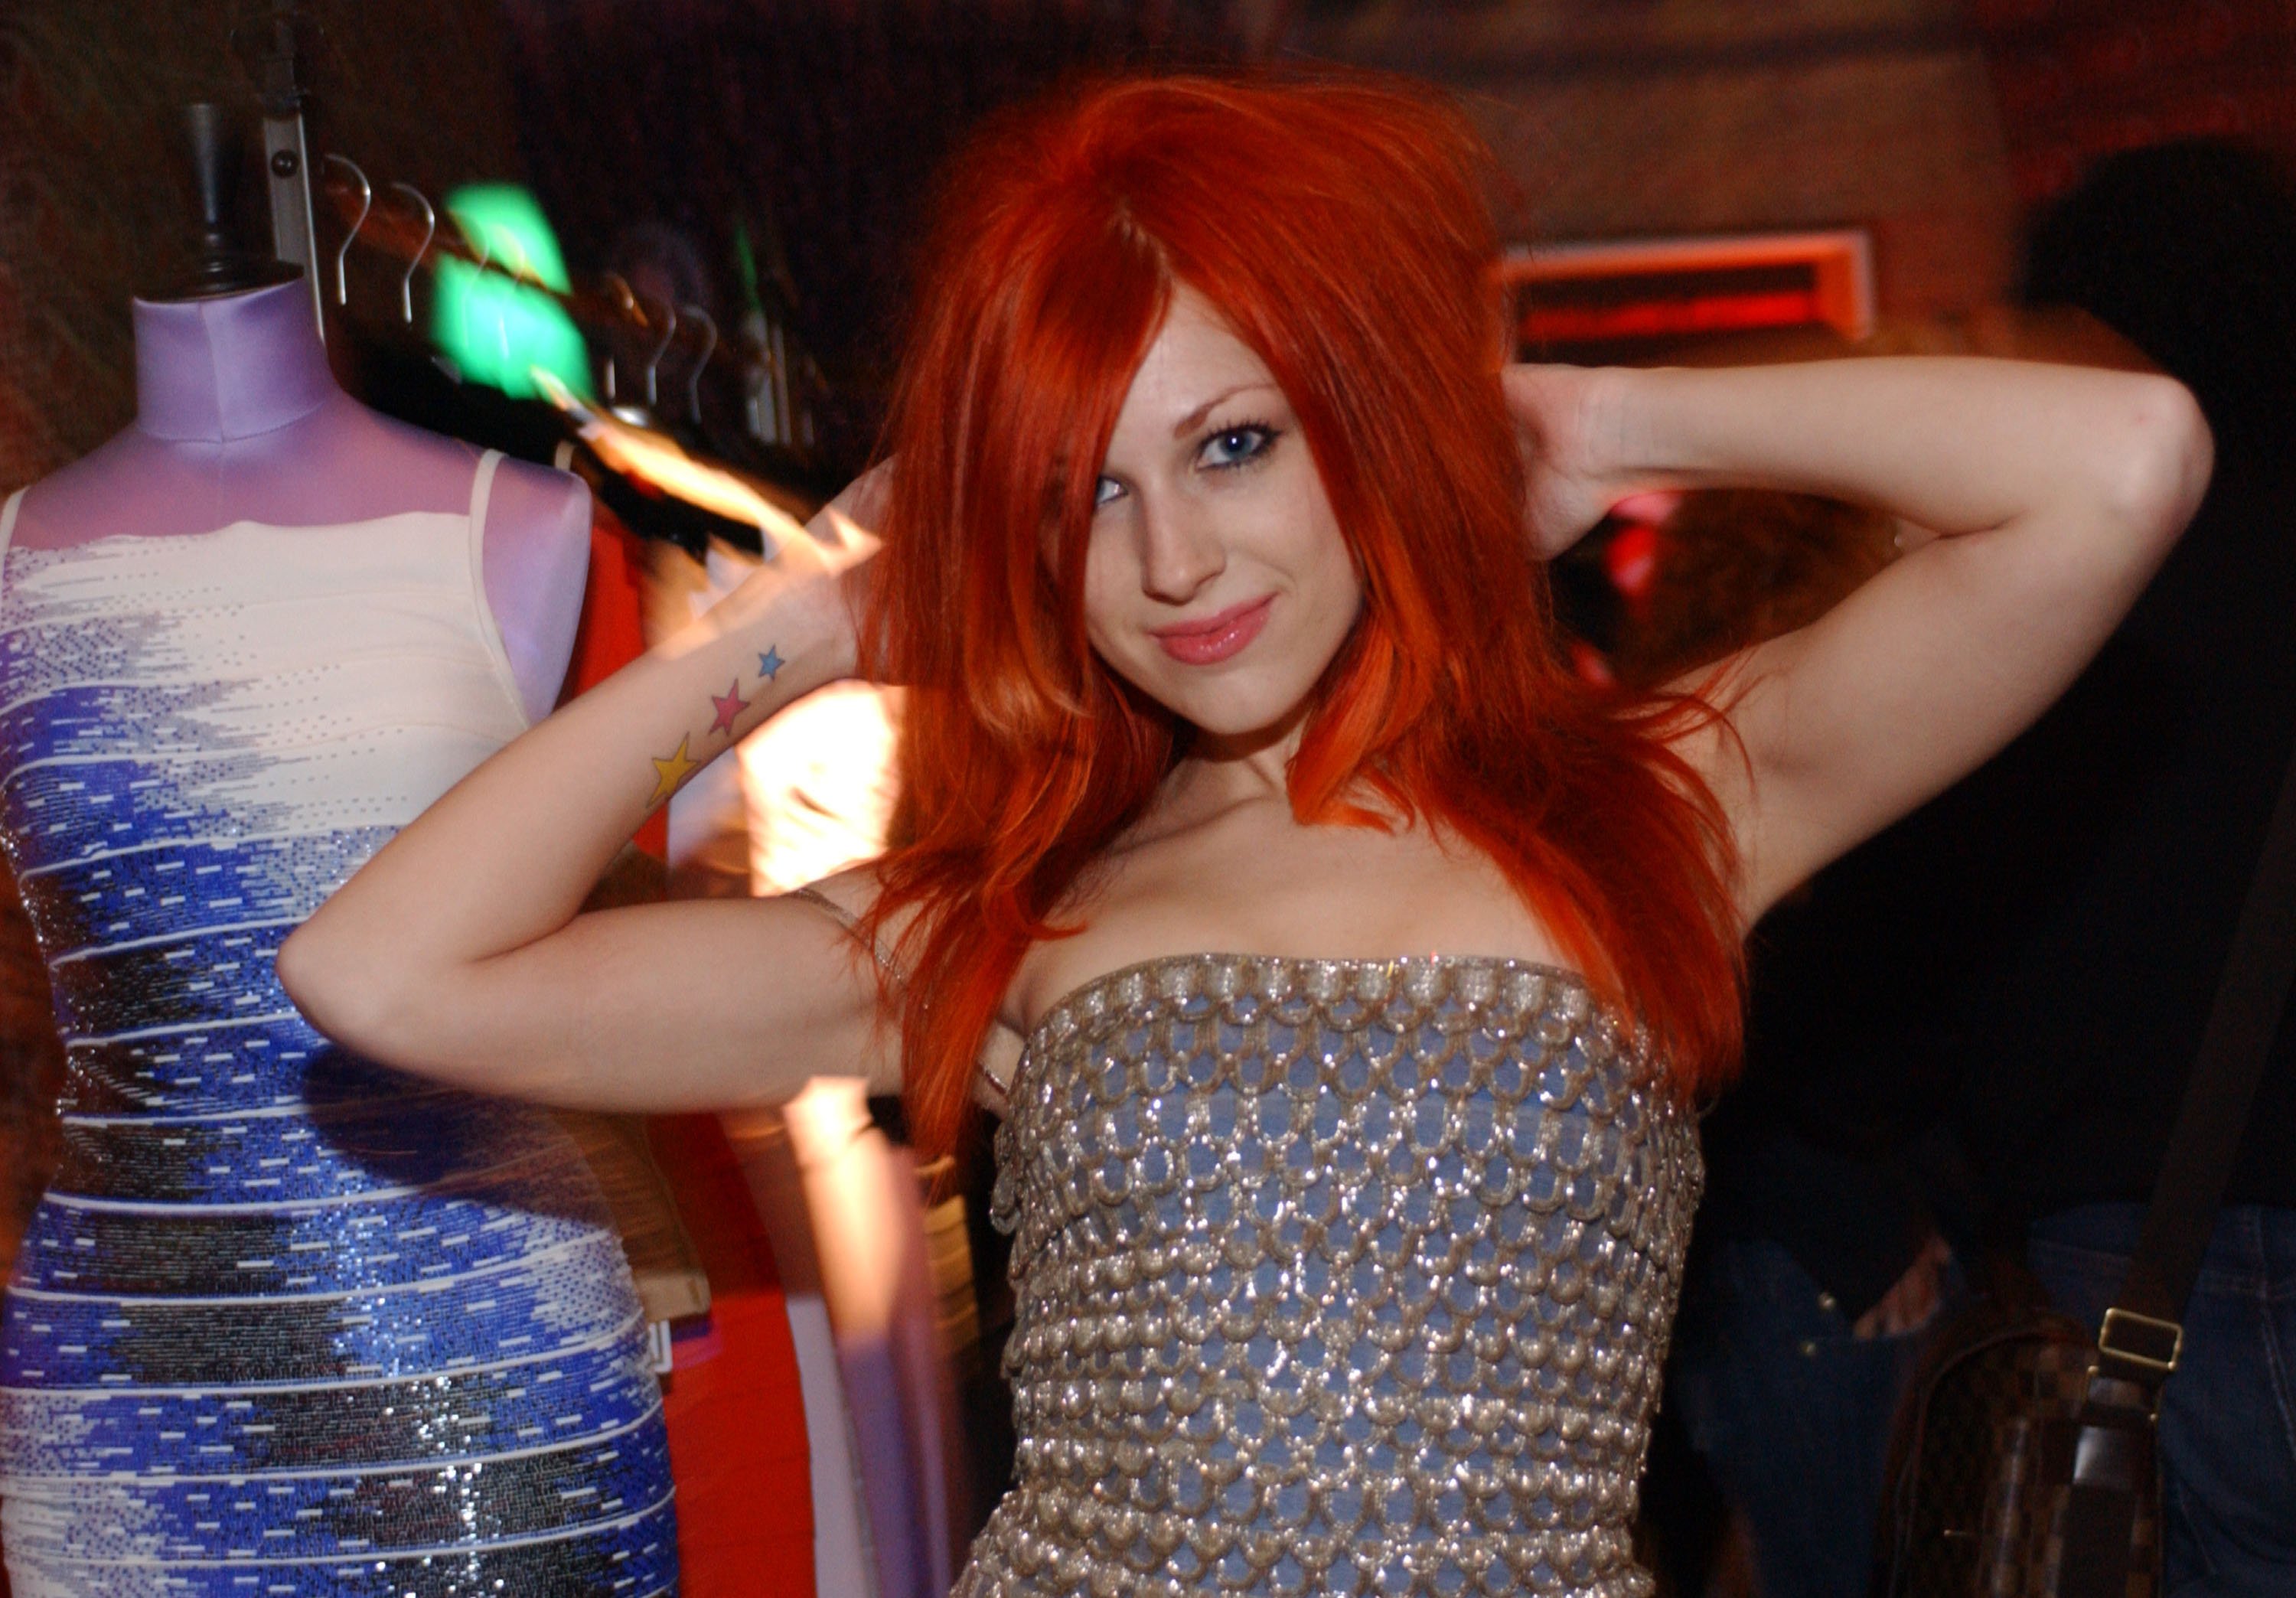 Bonnie McKee with vibrant red hair